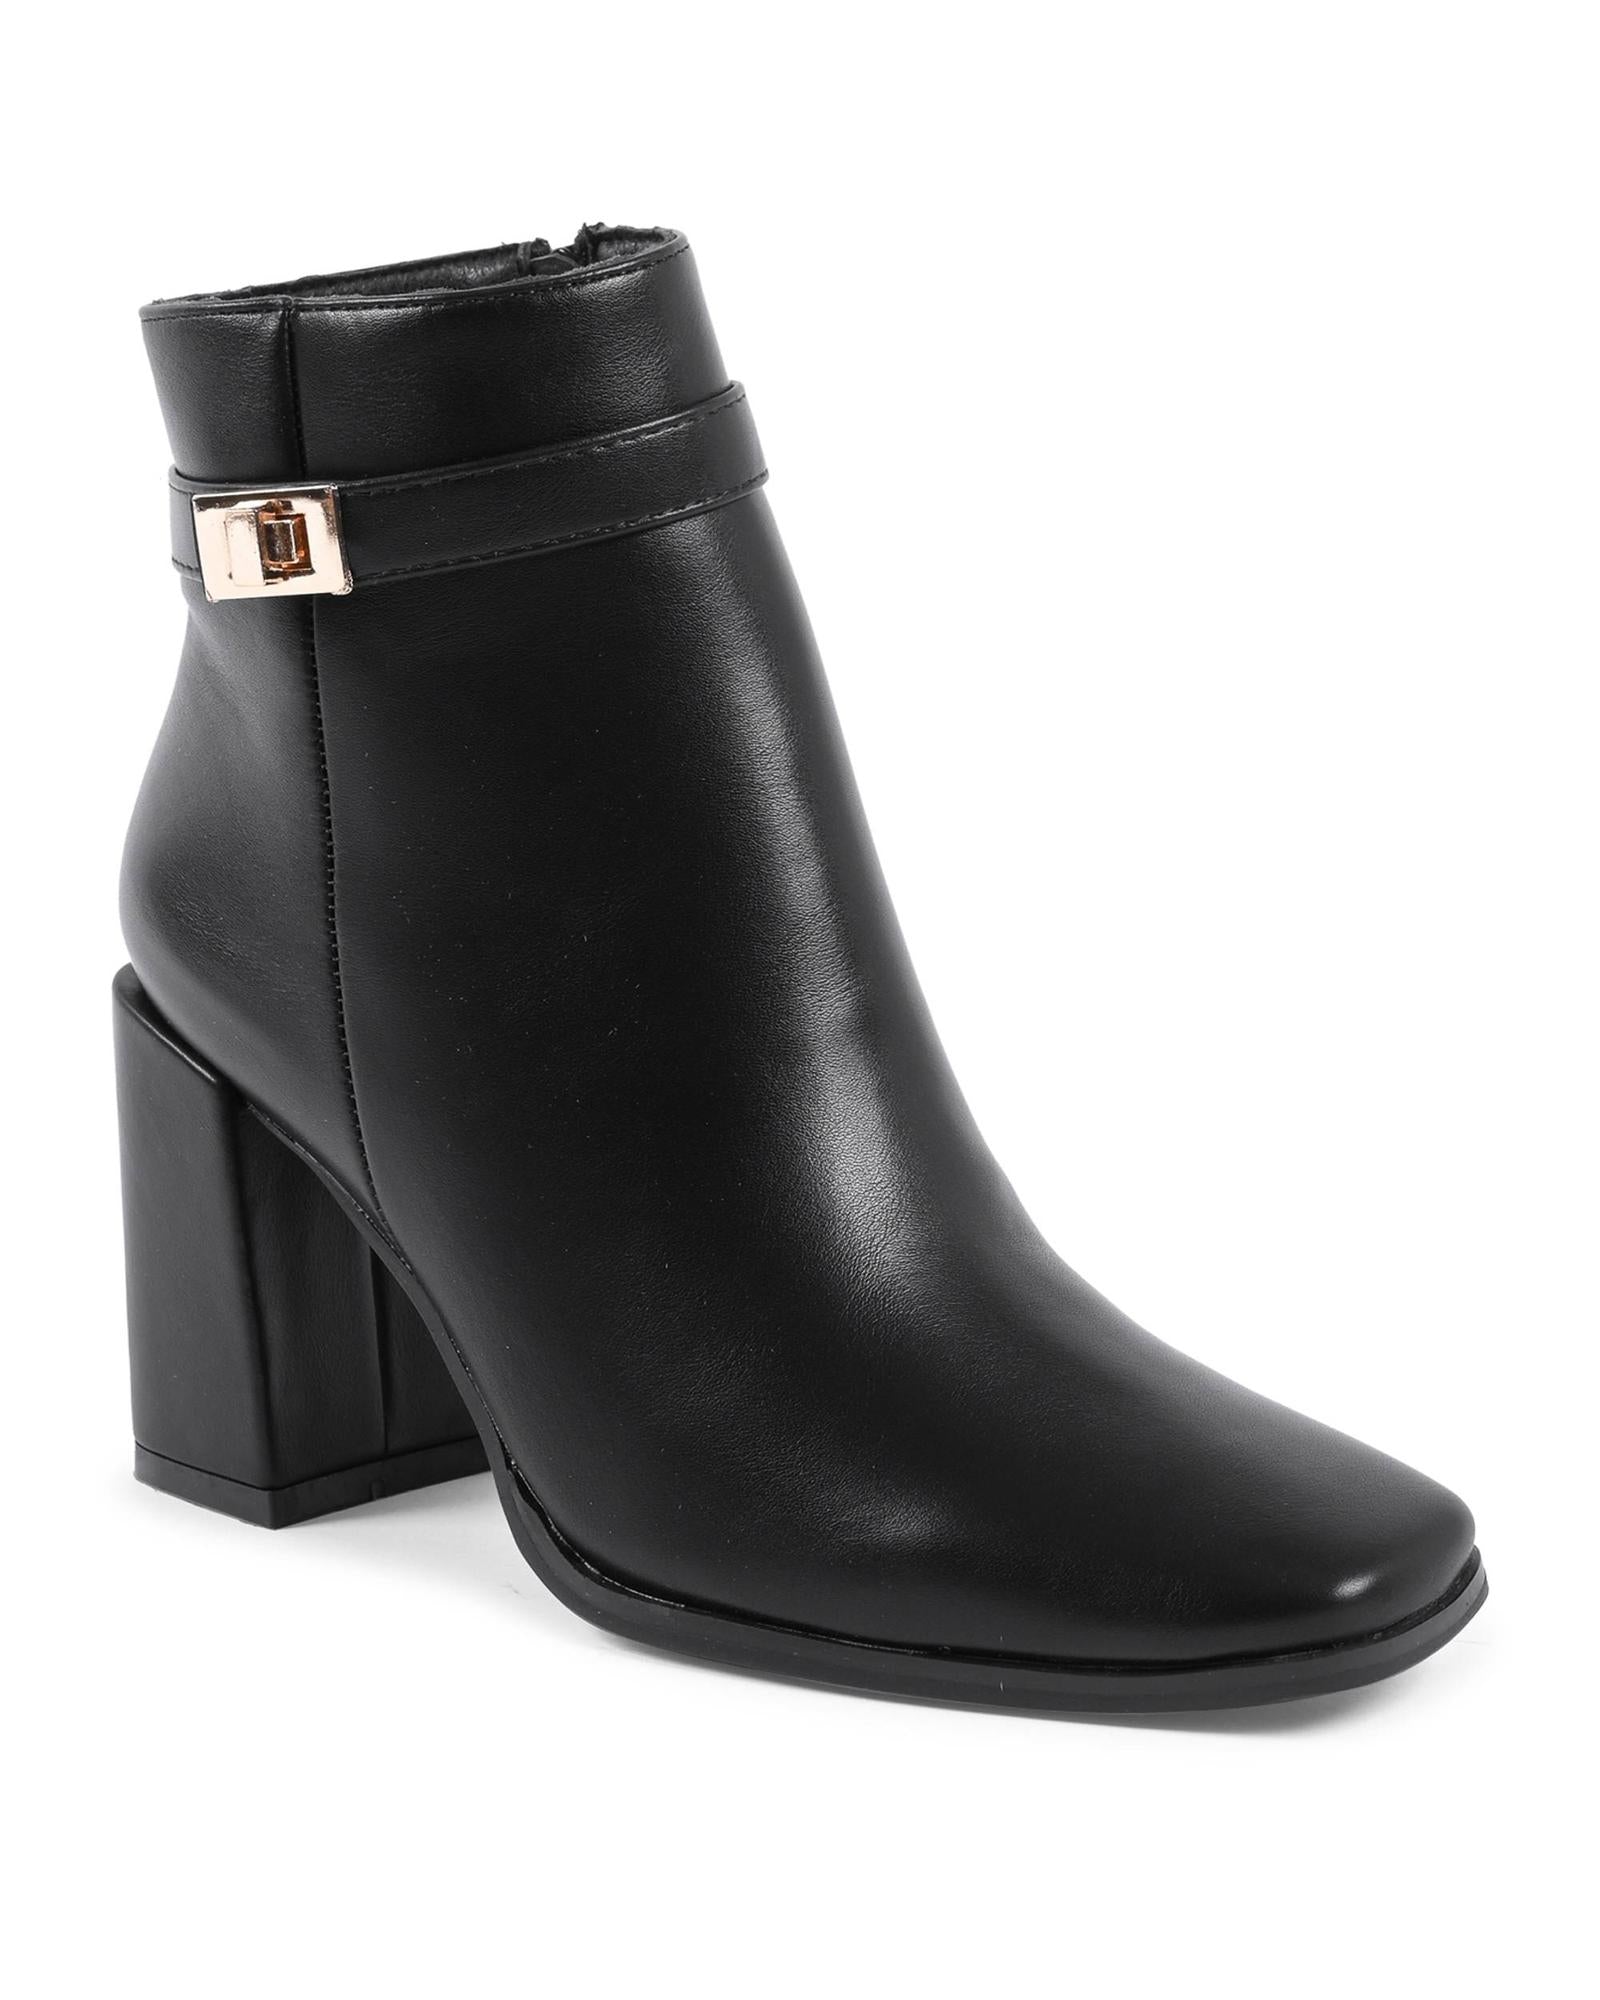 Synthetic Leather High-Heeled Ankle Boots - 36 EU